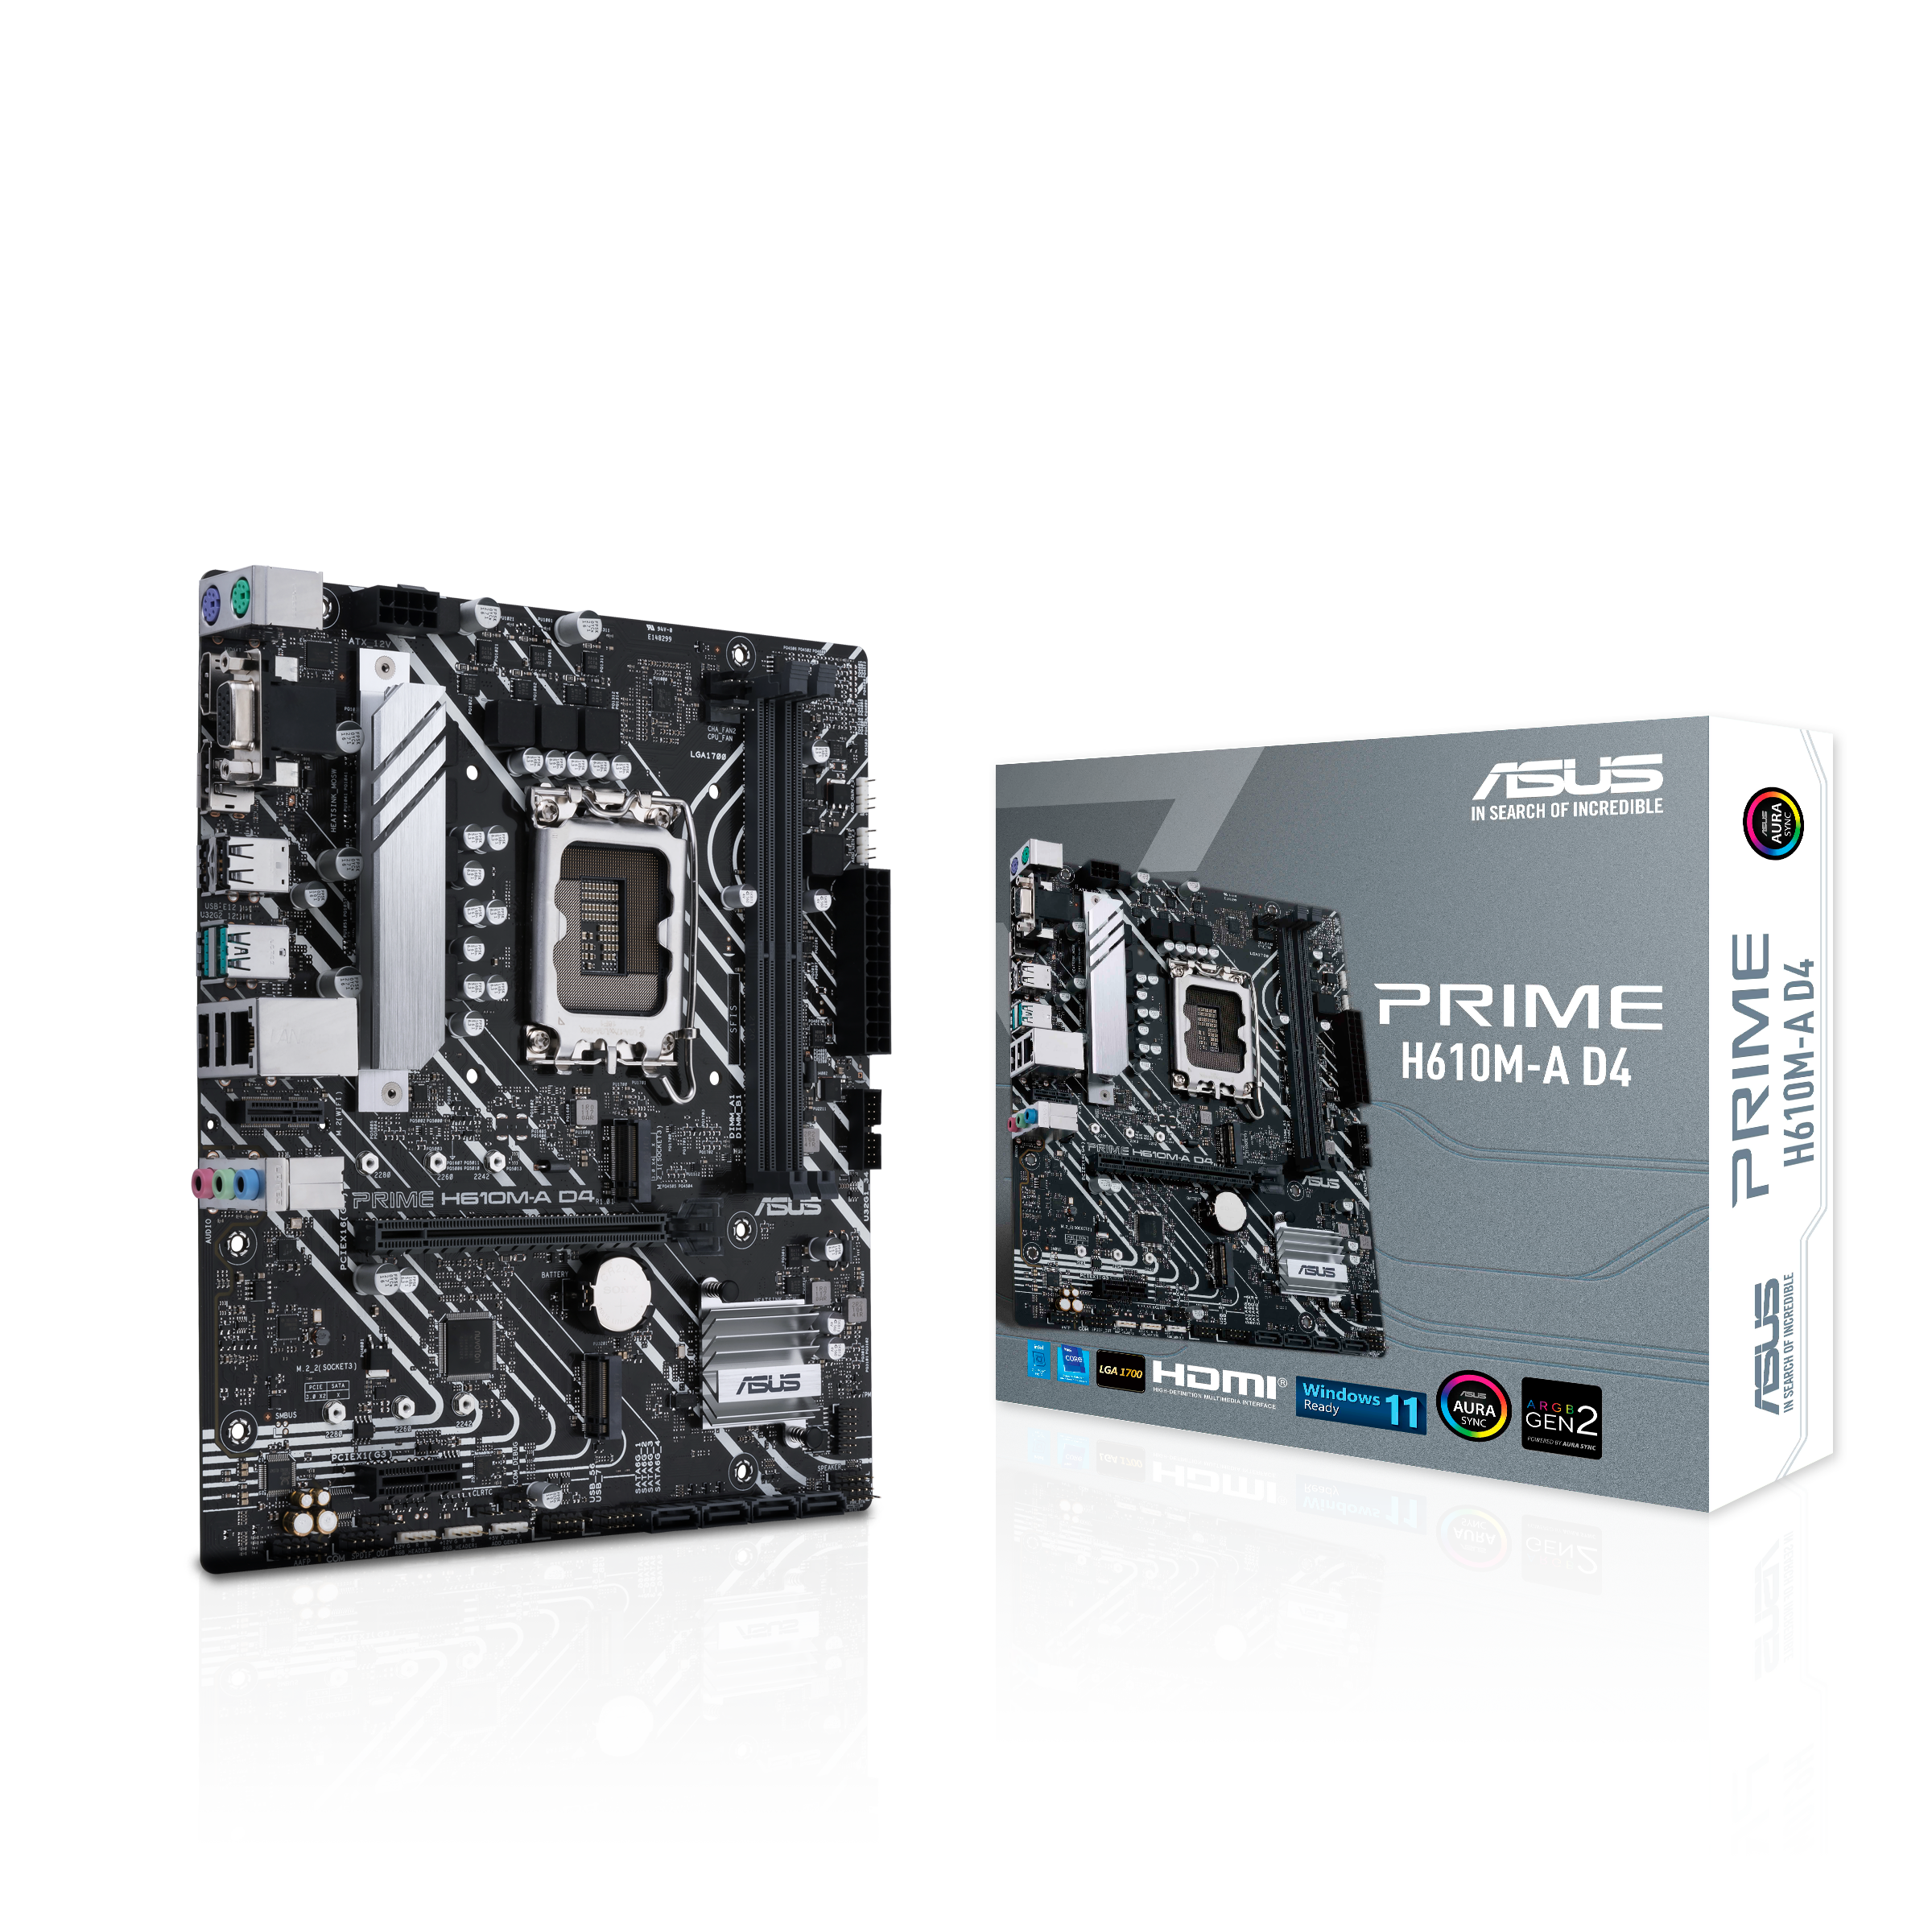 Asus Prime H610M-A D4 - Intel H610 DDR4 Micro ATX Motherboard